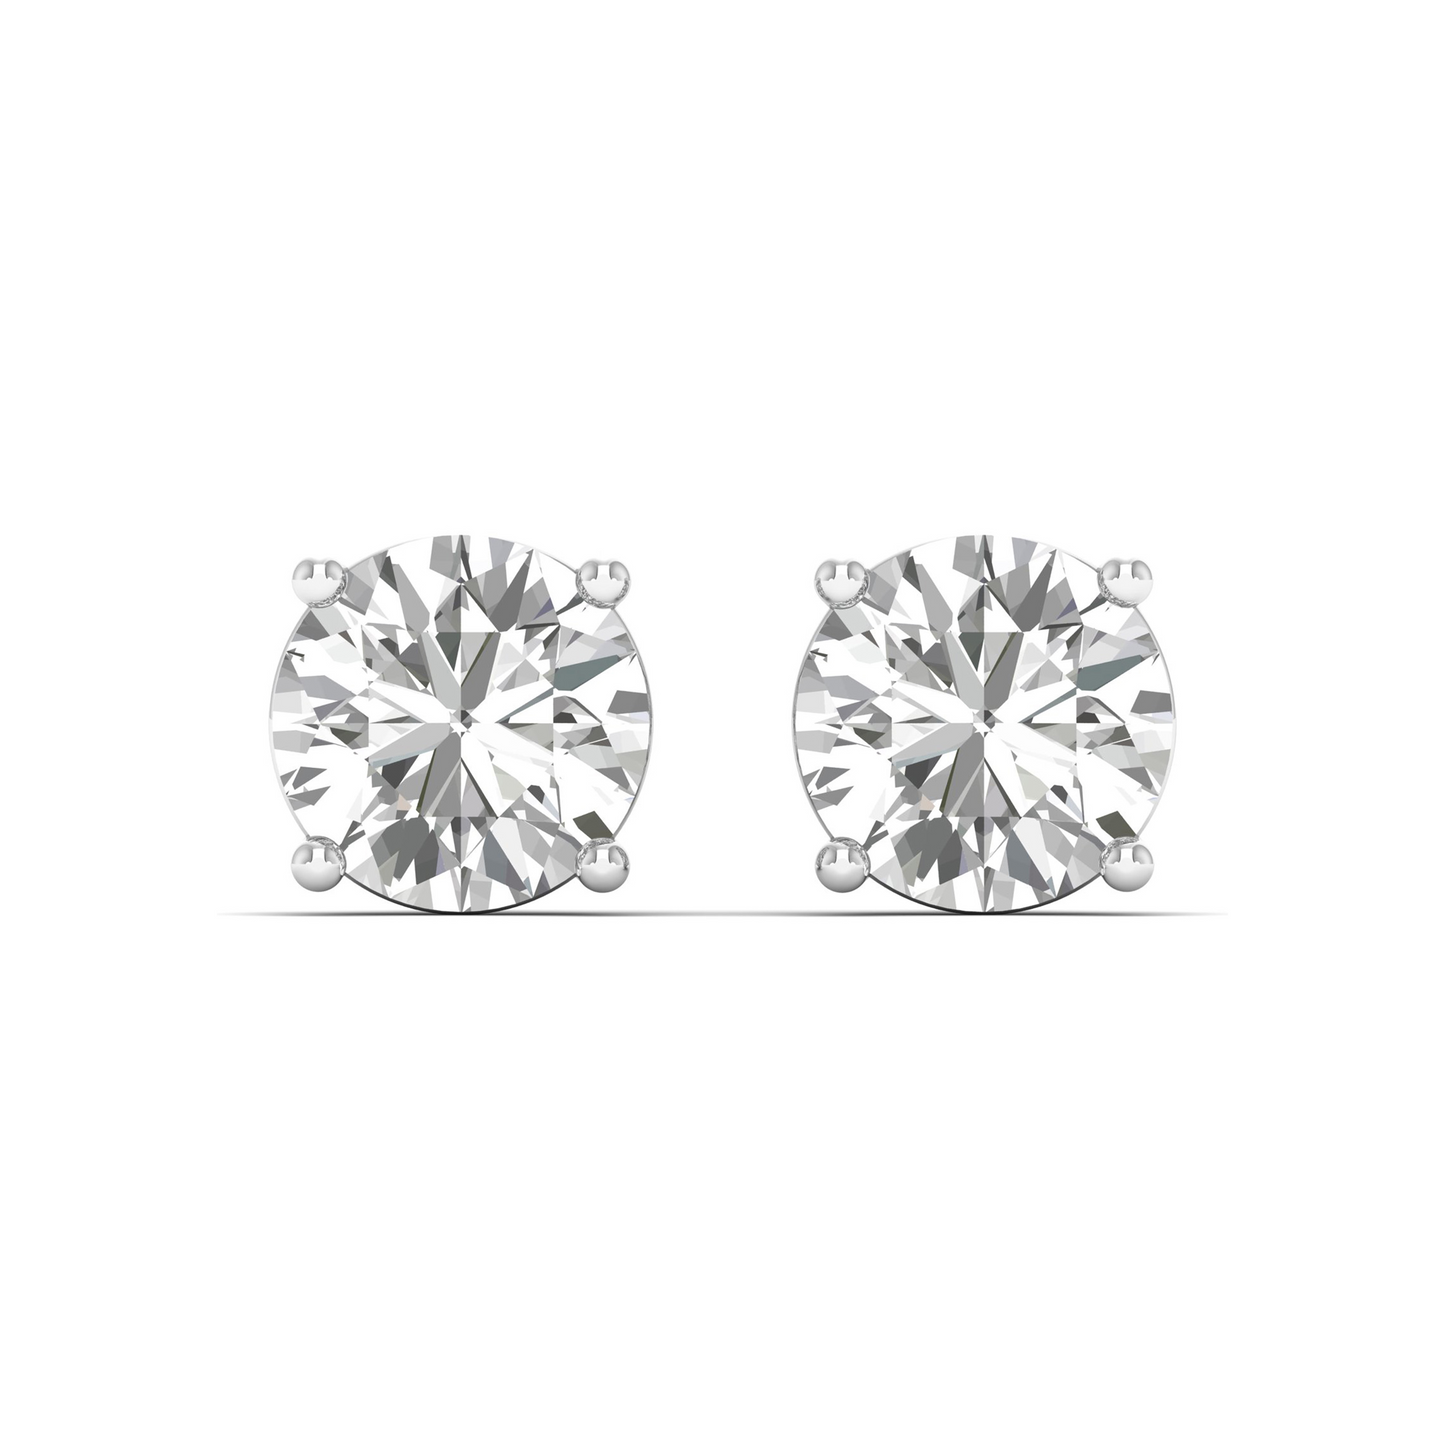 Radiant Circles: Elevate Your Elegance with our Exquisite Round-Cut Diamond Earring